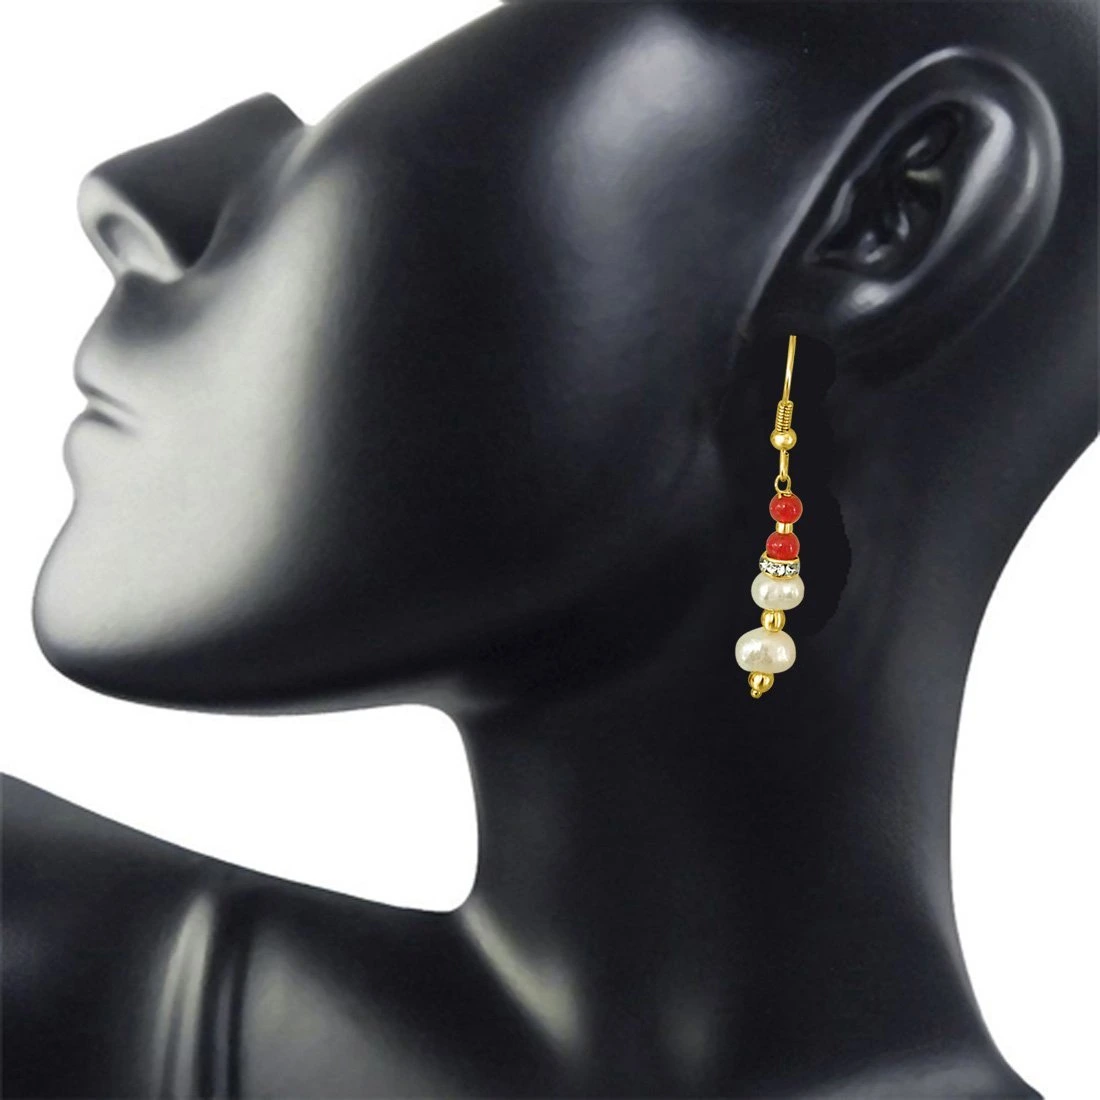 Real Pearl & Red Coloured Stone Hanging Earrings (SE206)